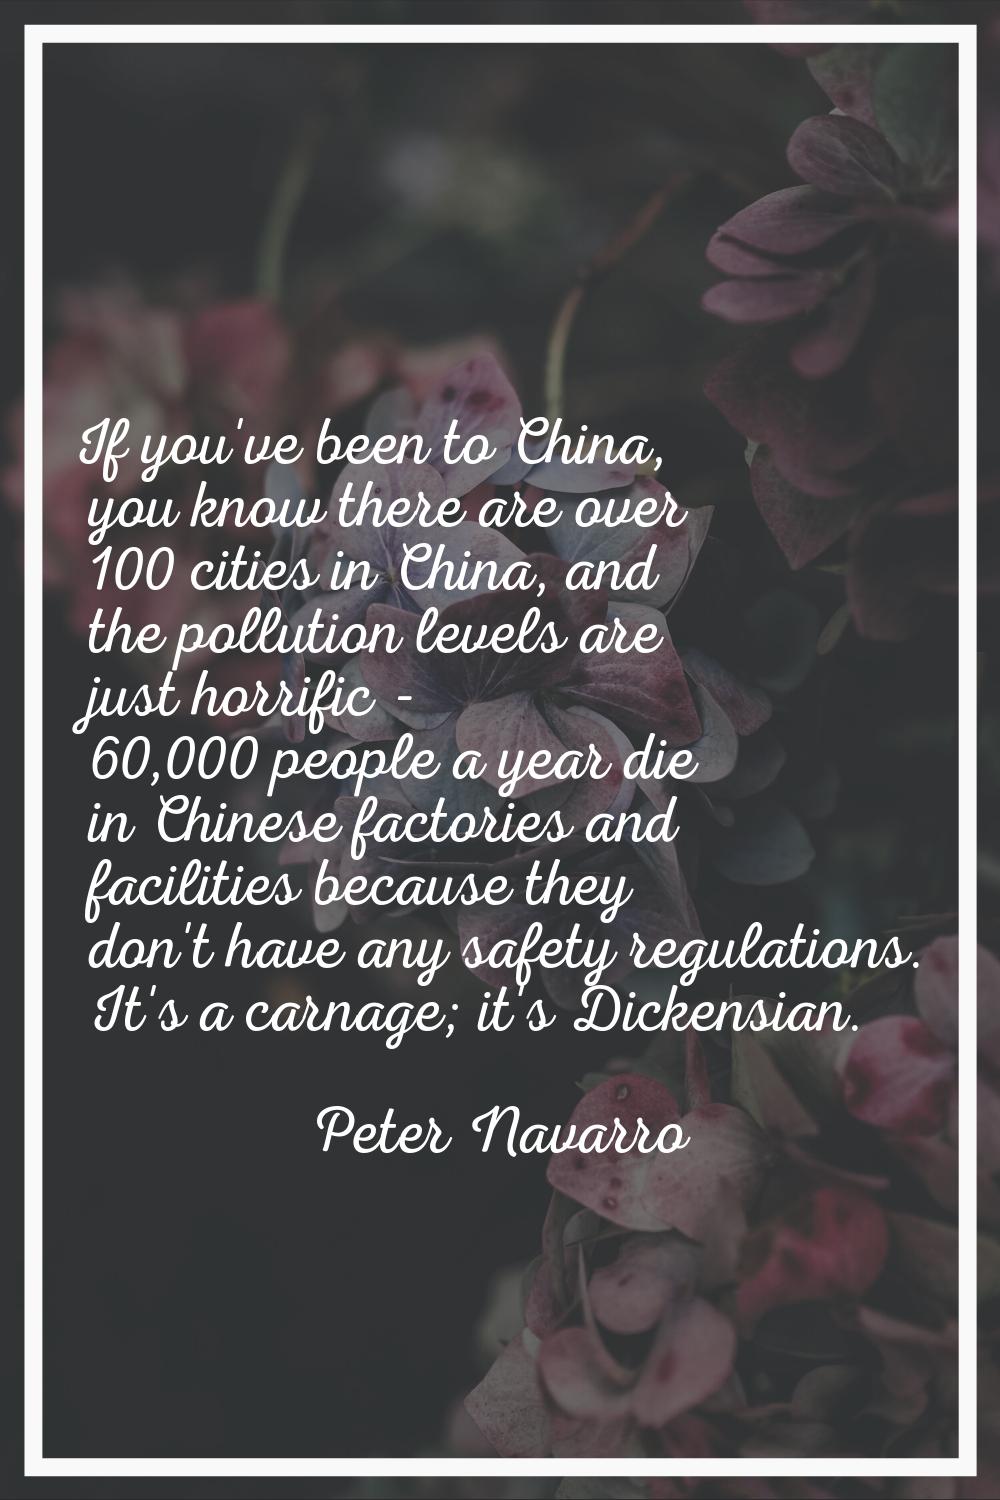 If you've been to China, you know there are over 100 cities in China, and the pollution levels are 